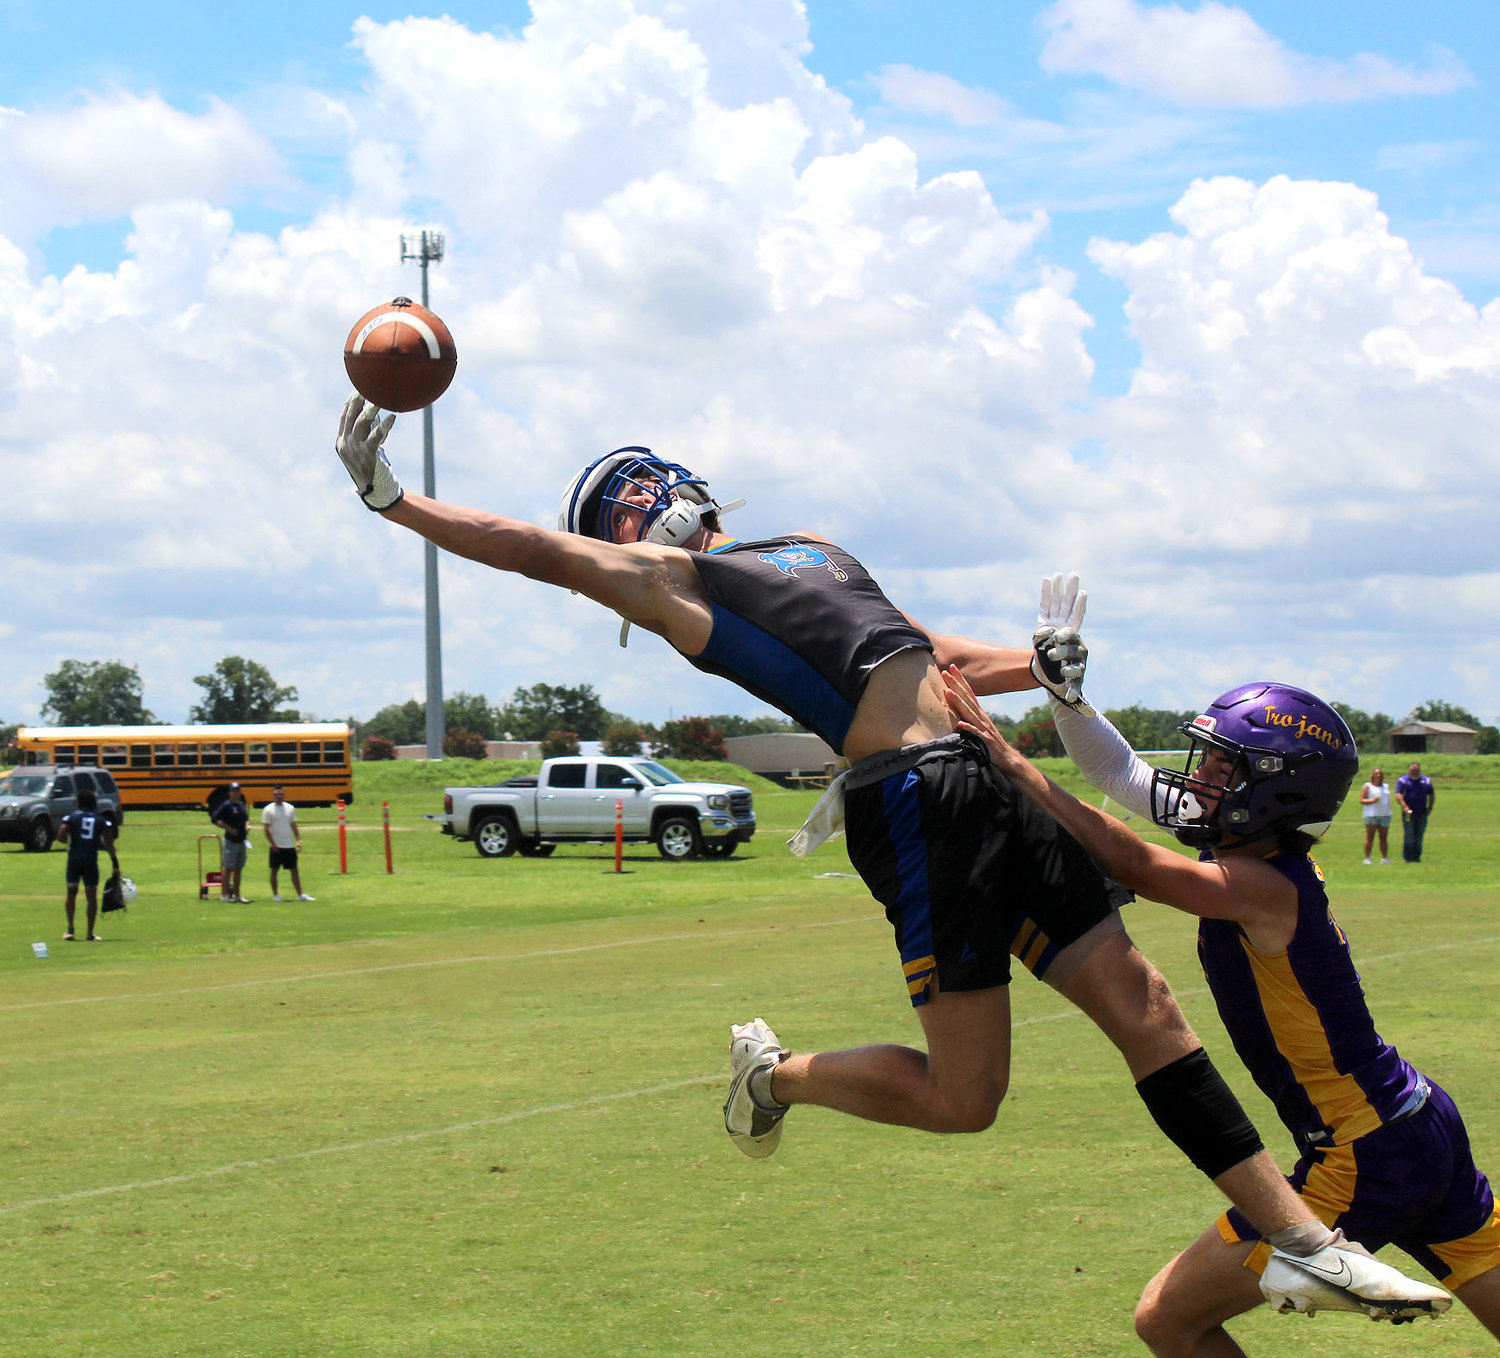 Ben Moseley attempts to reel in a bobbled catch during the Jubilee City 7-on-7 tournament at the Al Trione Sports Complex in Daphne on July 14, 2022.